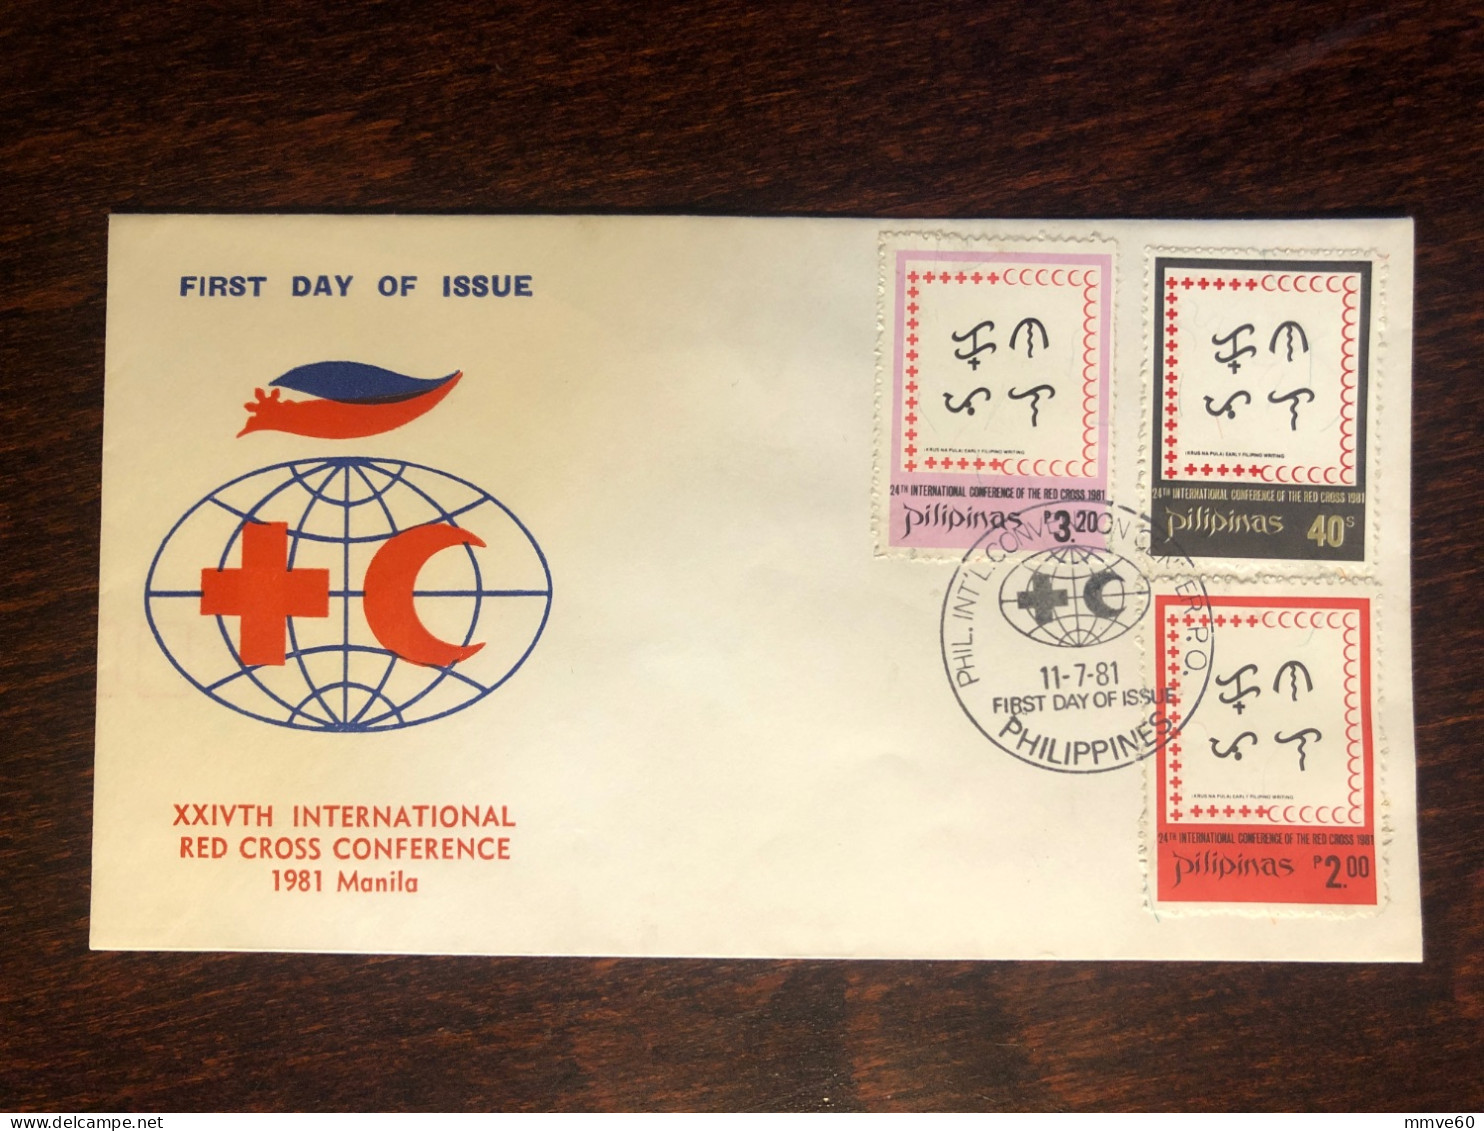 PHILIPPINES FDC COVER 1981 YEAR RED CROSS RED CRESCENT HEALTH MEDICINE STAMPS - Philippines